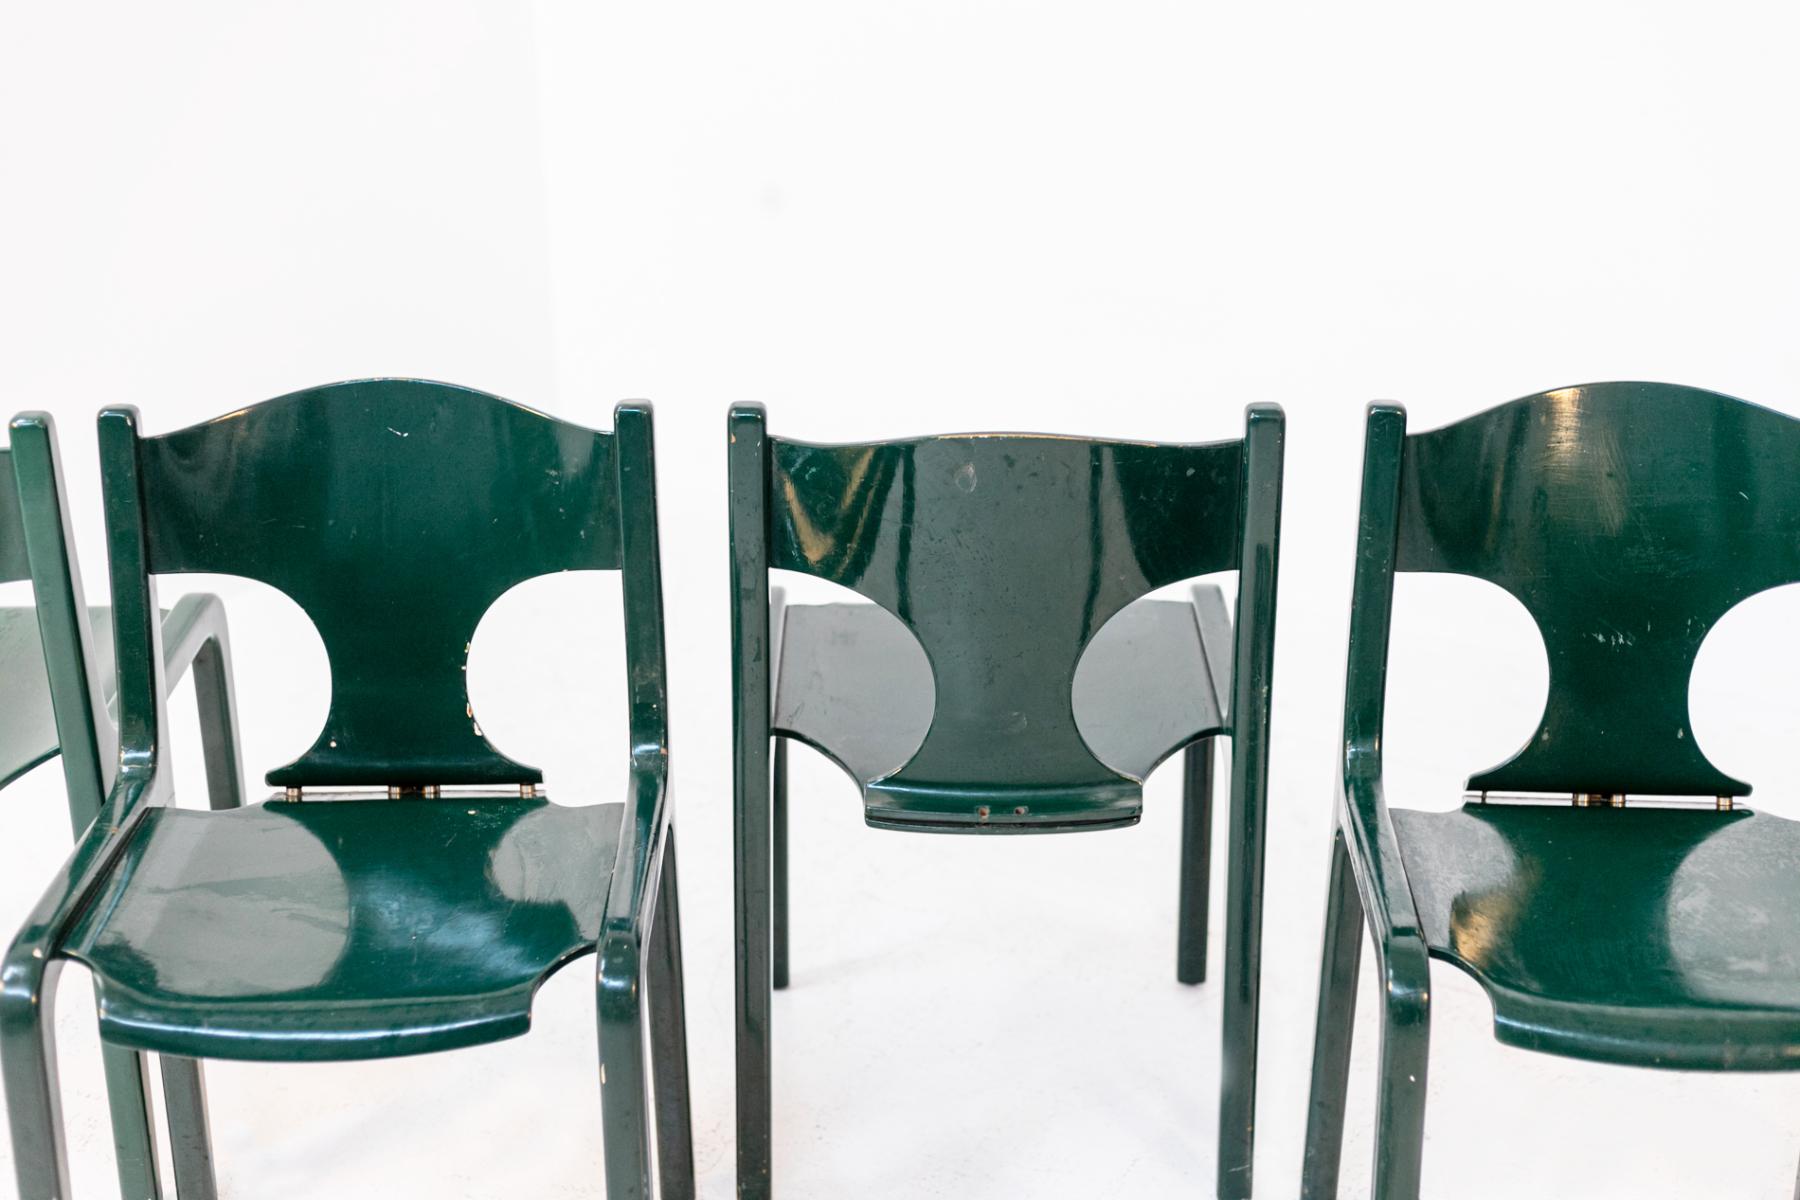 Wonderful set composed of six beautiful chairs designed by architect Augusto Savini for the manufacture of Pozzi Giuseppe and sons in 1968.
The chairs were mass produced and were first presented at Pozzi's Gallerie Lafayette in 1968. Published in